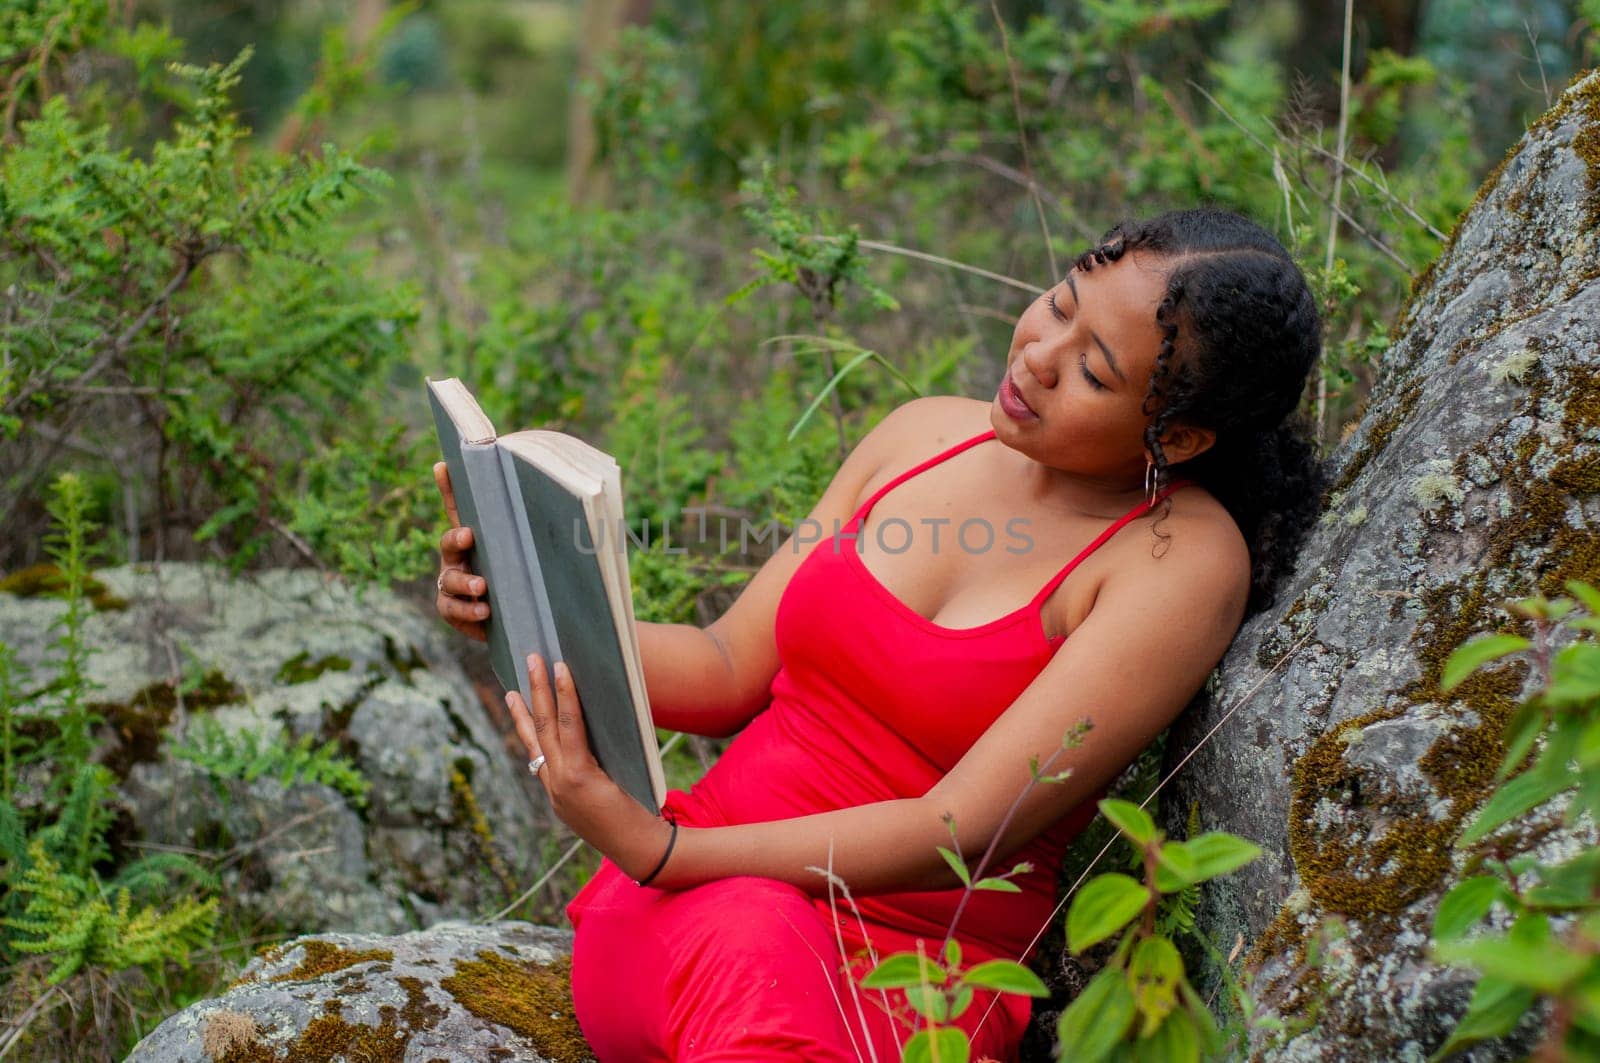 latina girl in red dress leaning against a tree surrounded by nature with an open book in her hands by Raulmartin